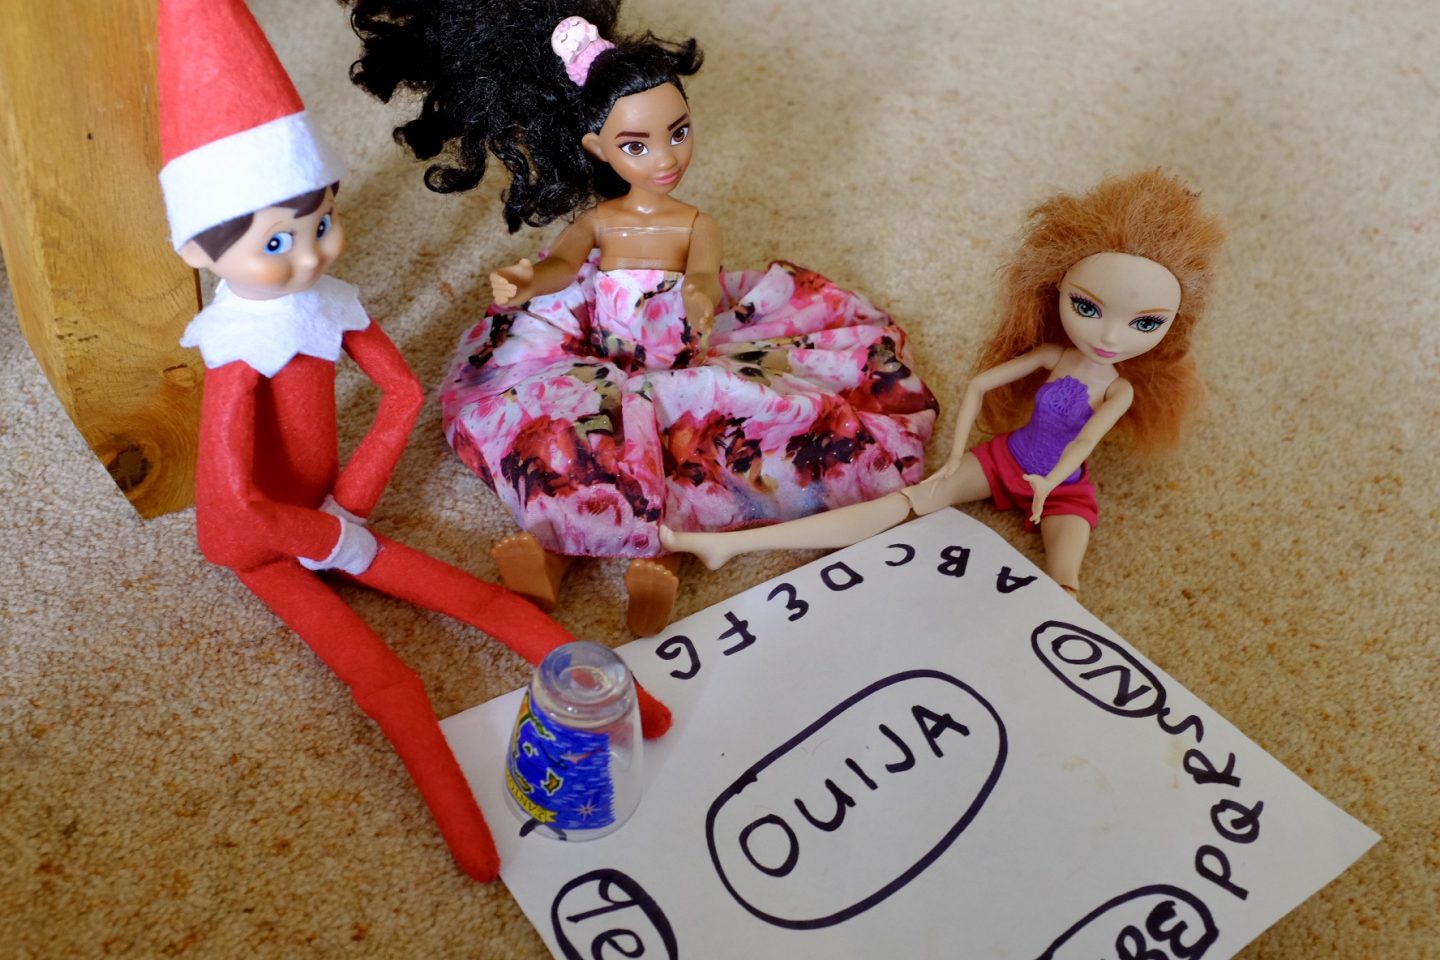 Elf does a ouija Board with the dolls. Naughty Elf on the shelf ideas